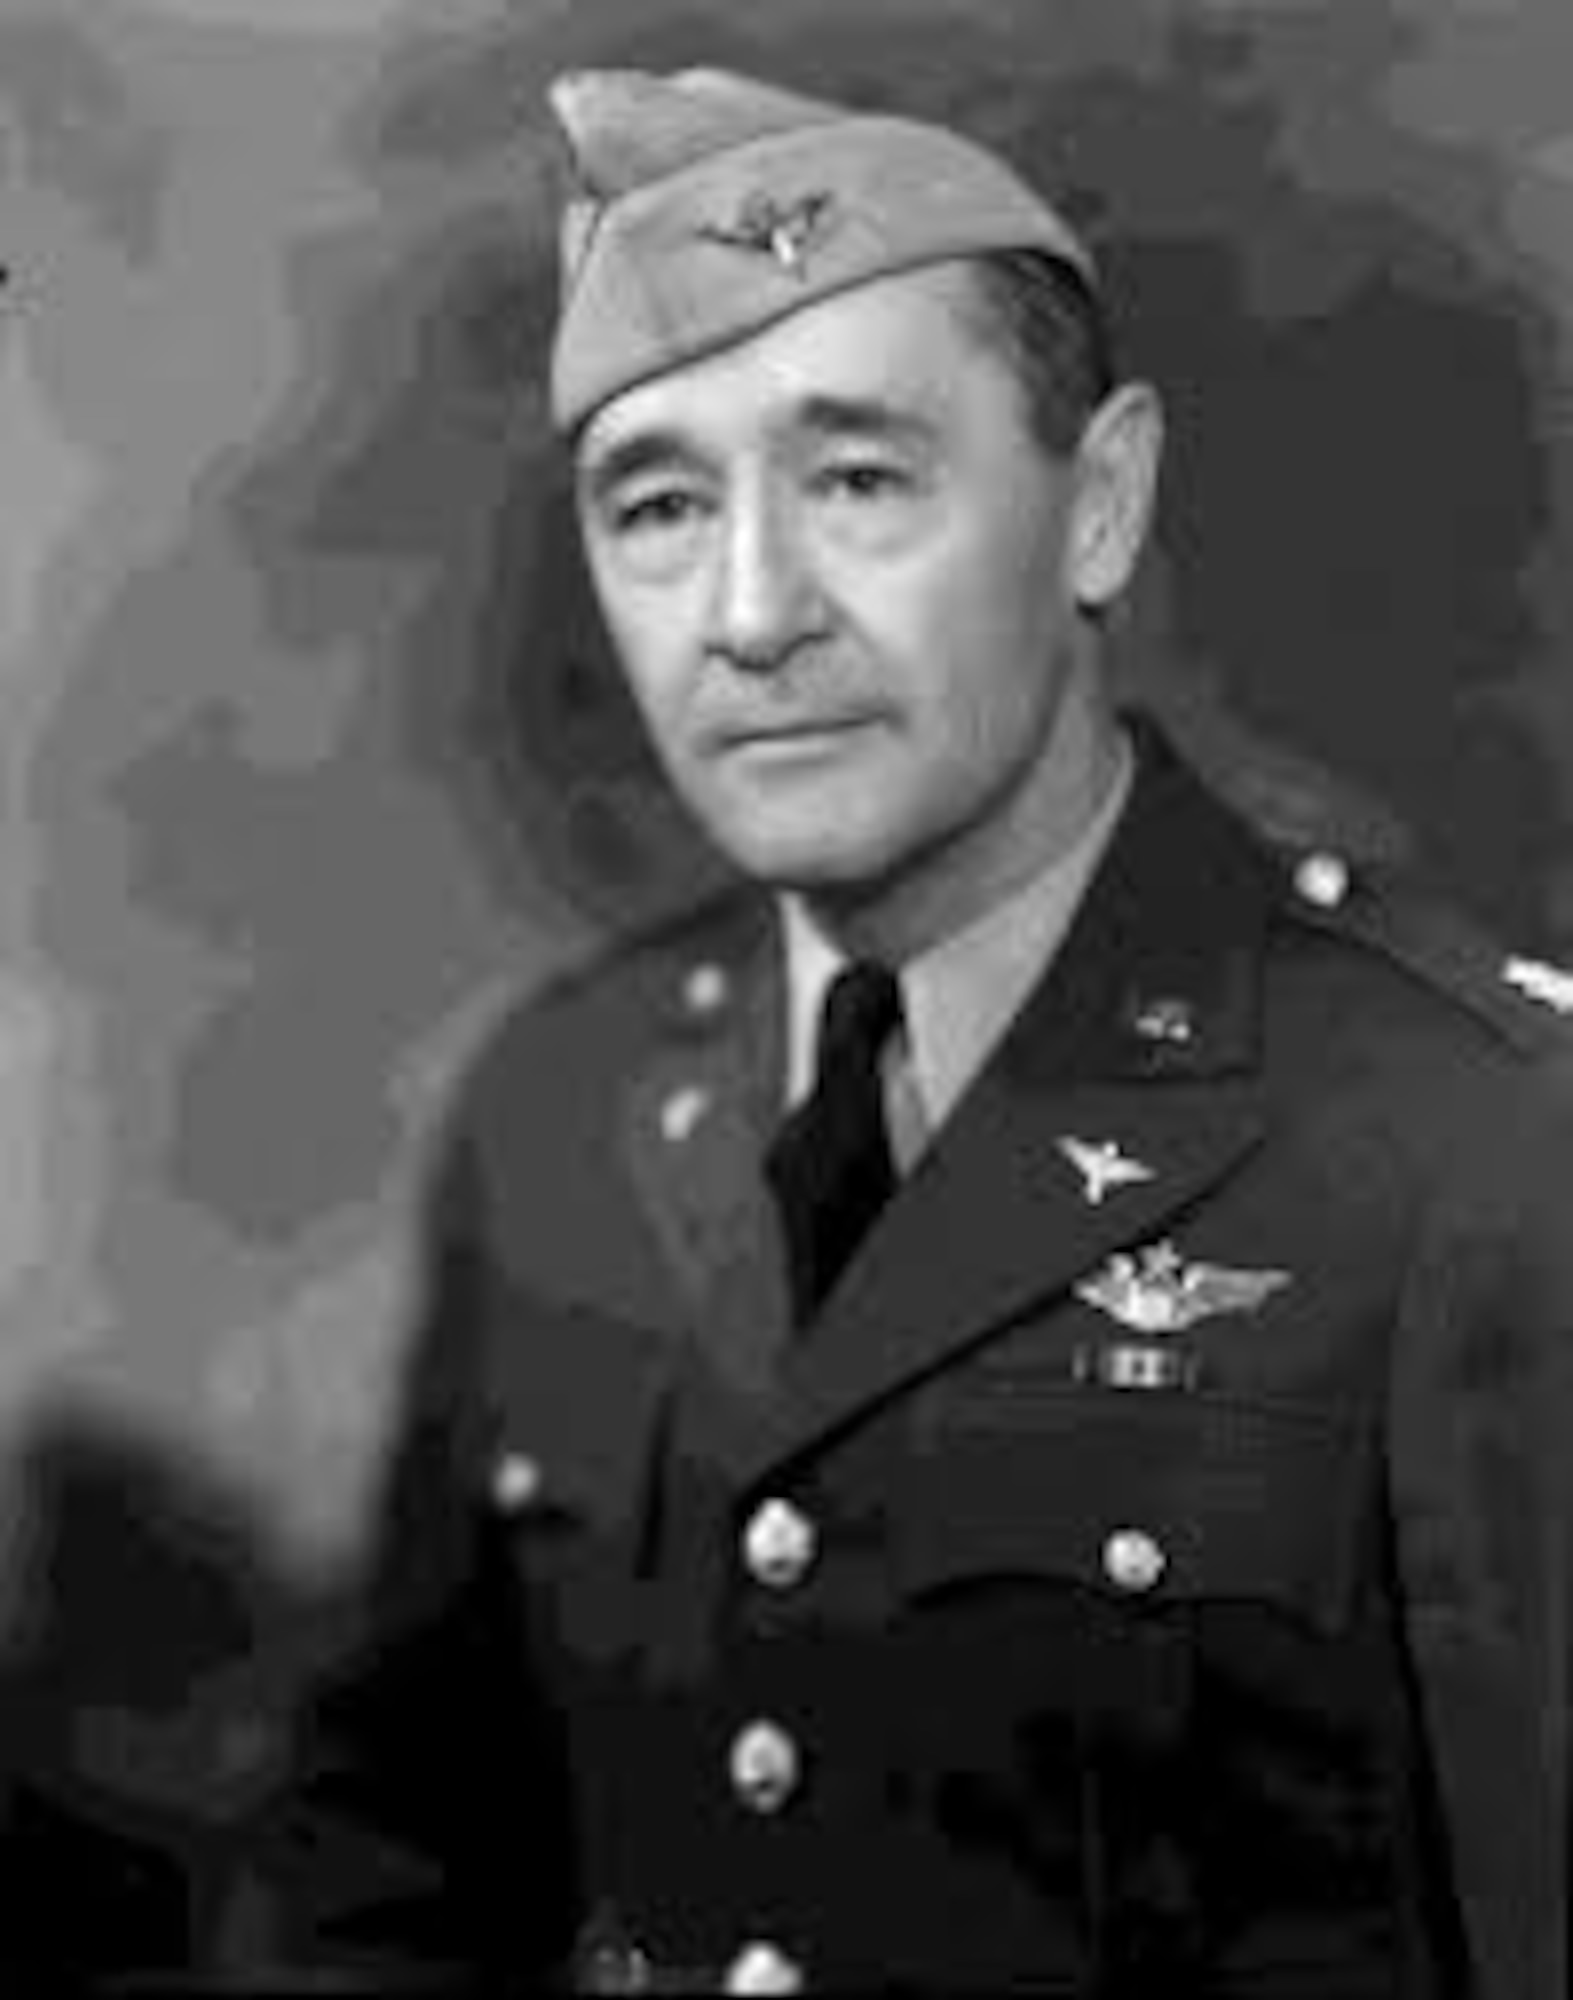 Lieutenant Colonel Benjamin F. Giles, Chief of the National Guard Bureau’s Aviation Division, played an important role in the creation of ten additional National Guard aviation squadrons in the years before World War II, including Oregon’s 123rd Observation Squadron. (Air National Guard)